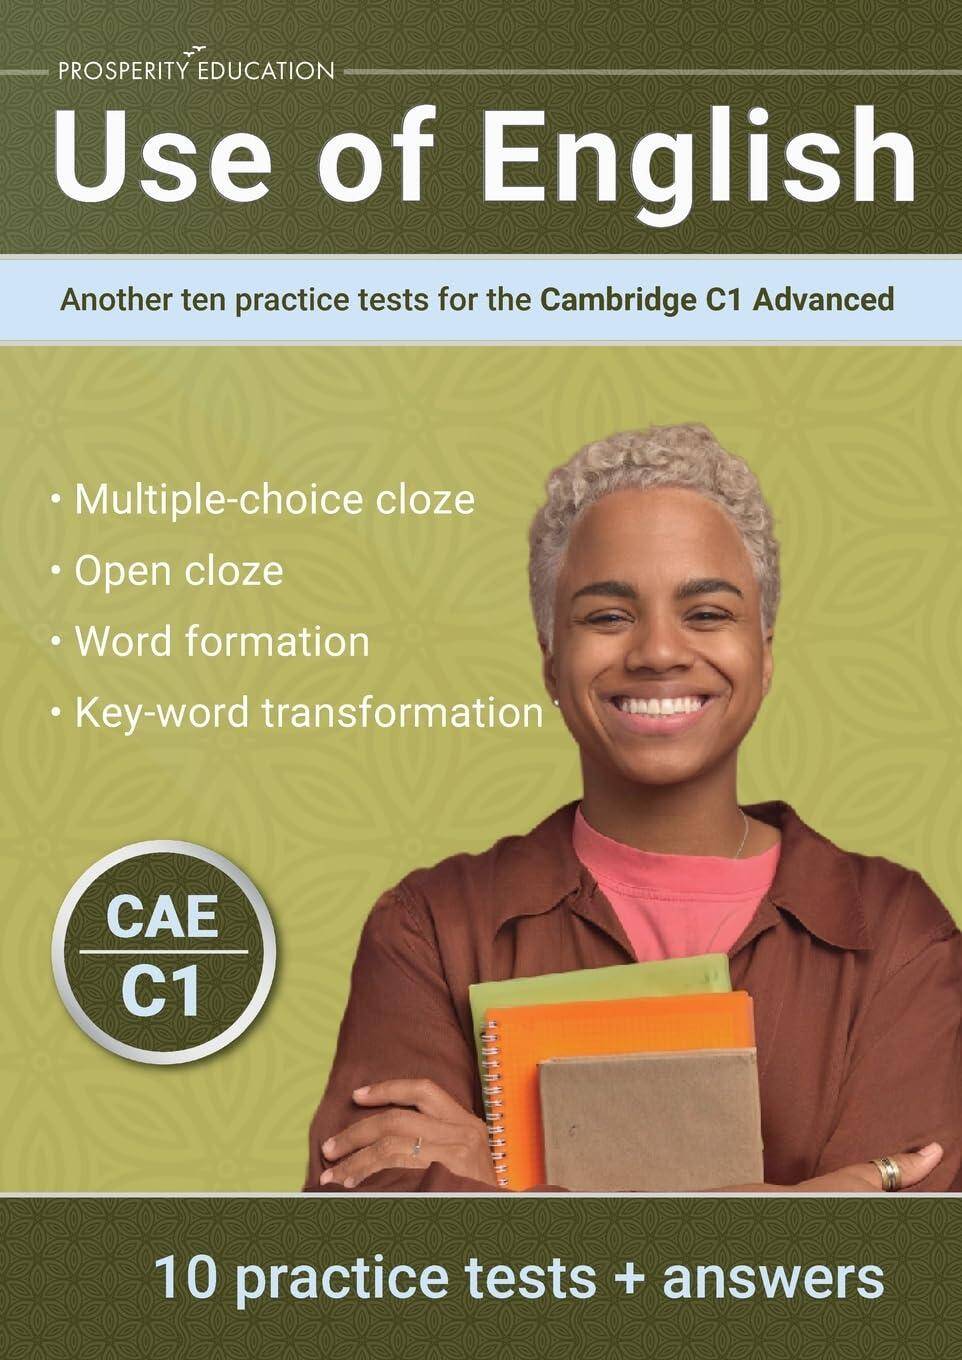 Use of English: Another Ten Practice Tests for the Cambridge C1